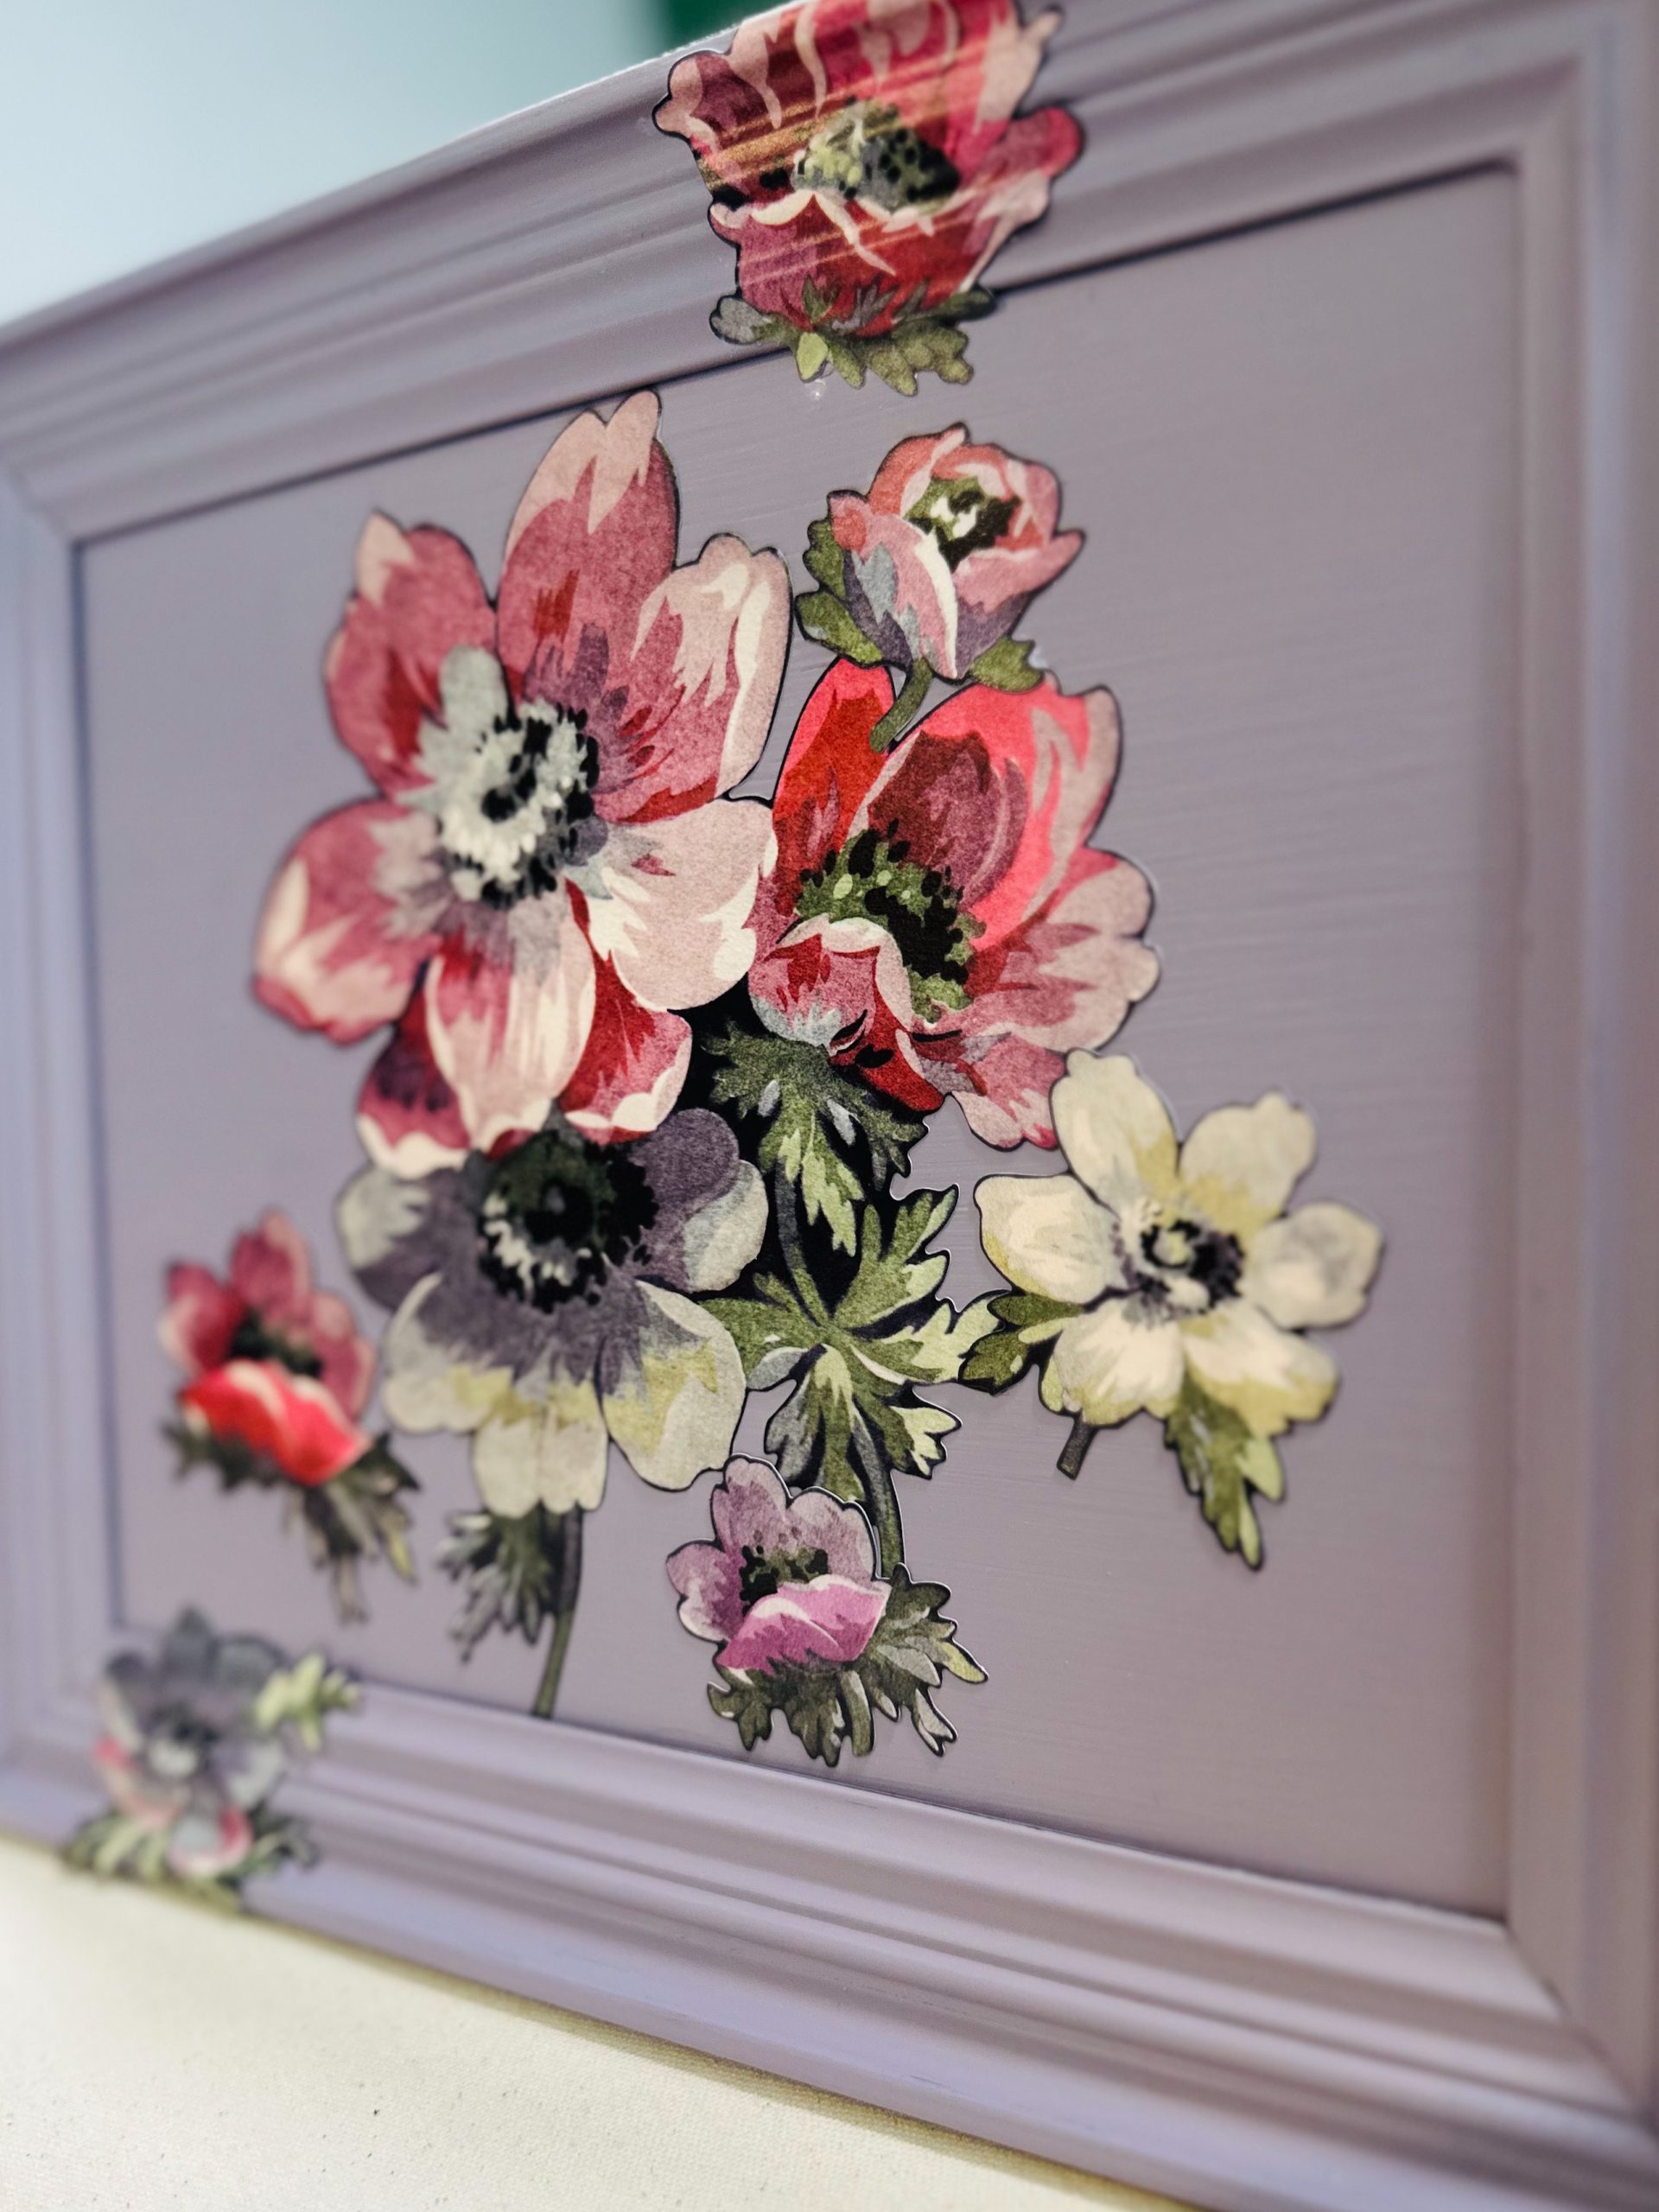 How to Make Floral Wall Art with WallPaper